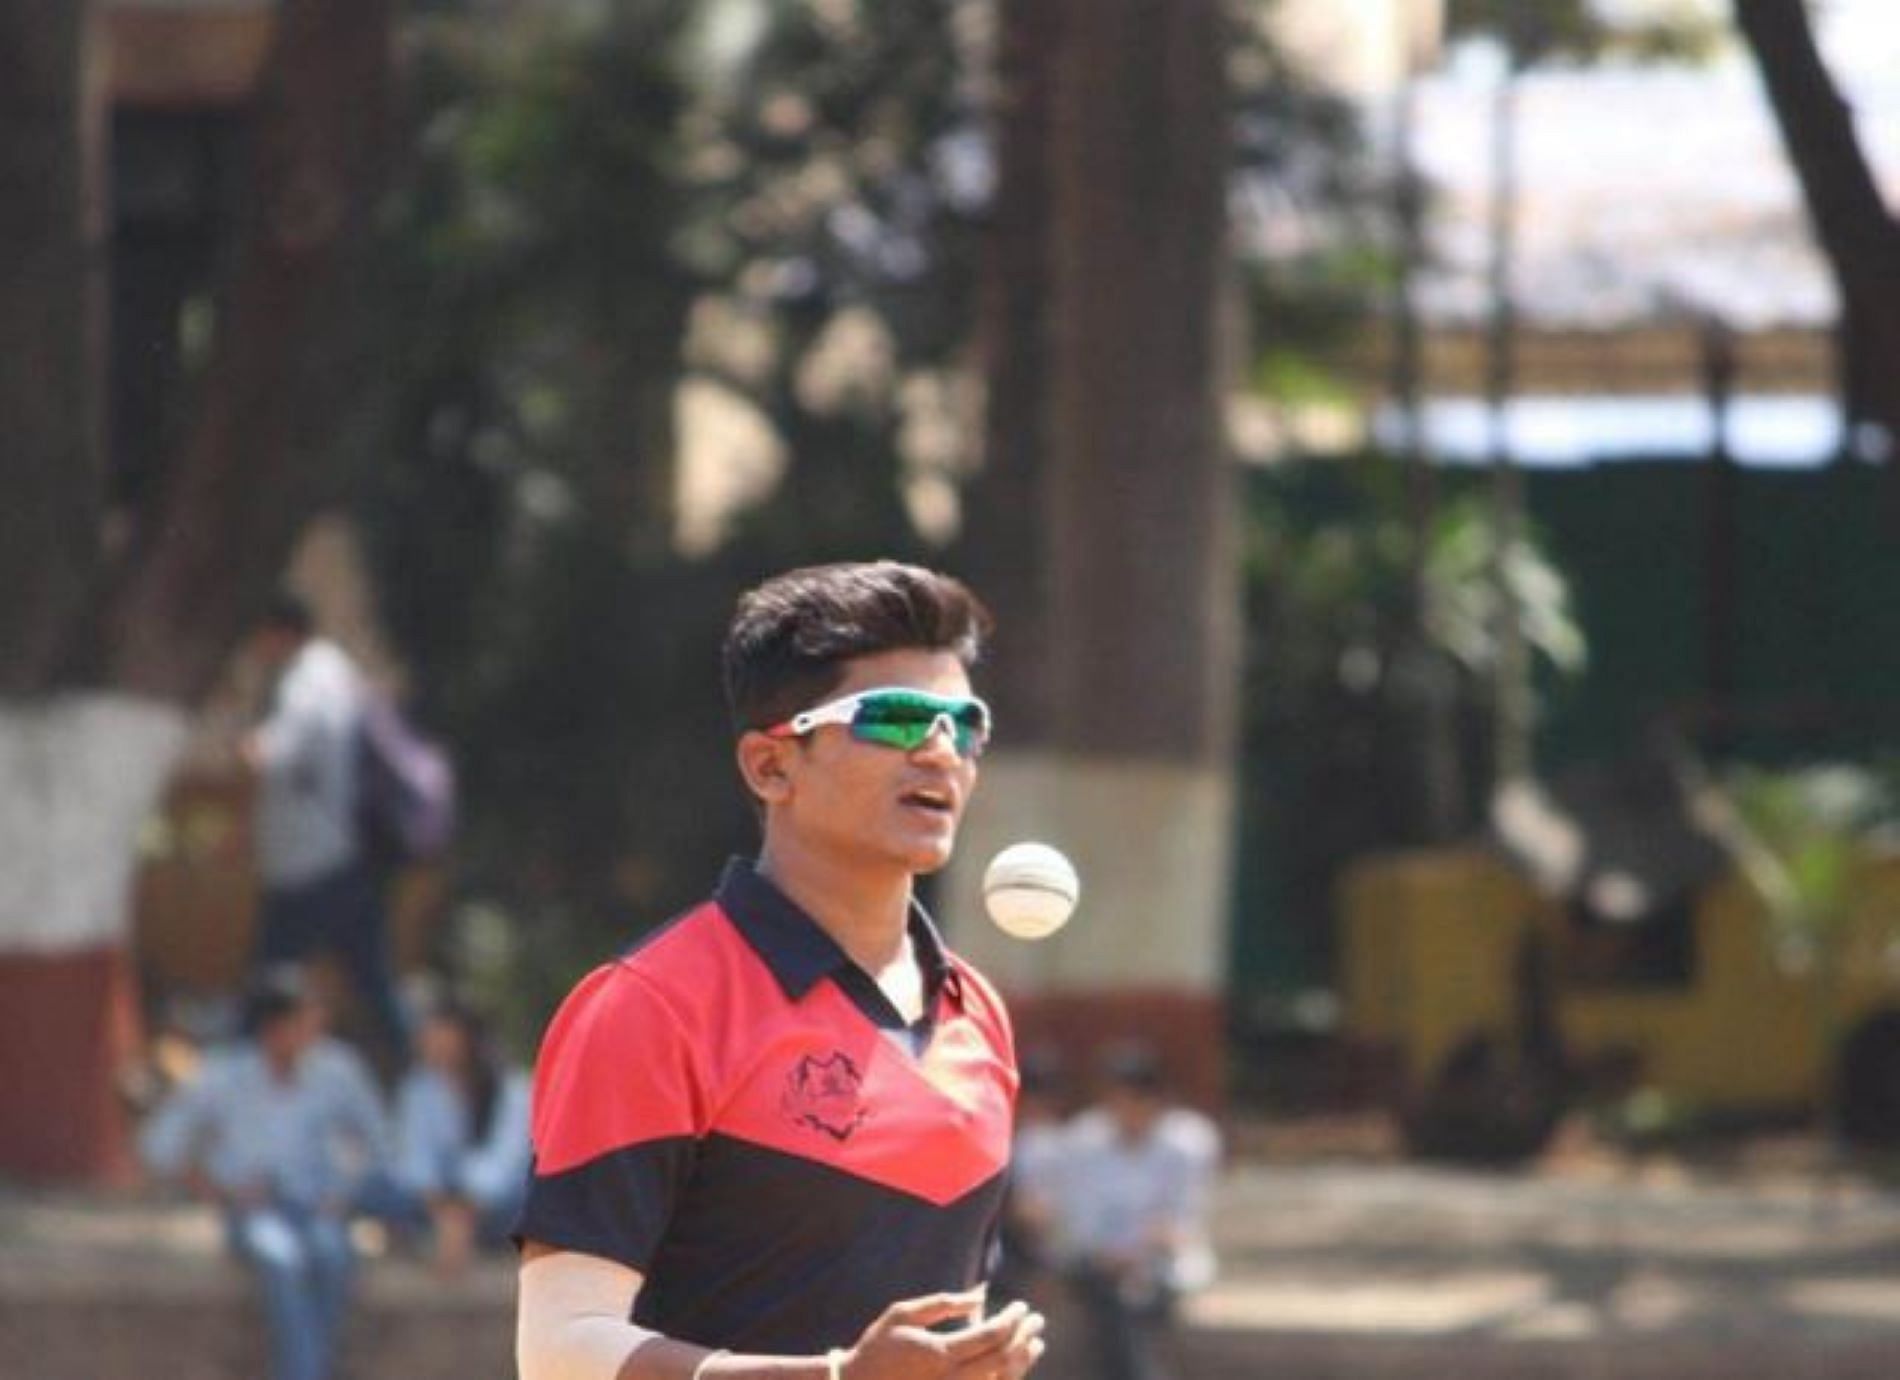 Bachhav has become a T20 specialist thanks to his exploits at SMAT.